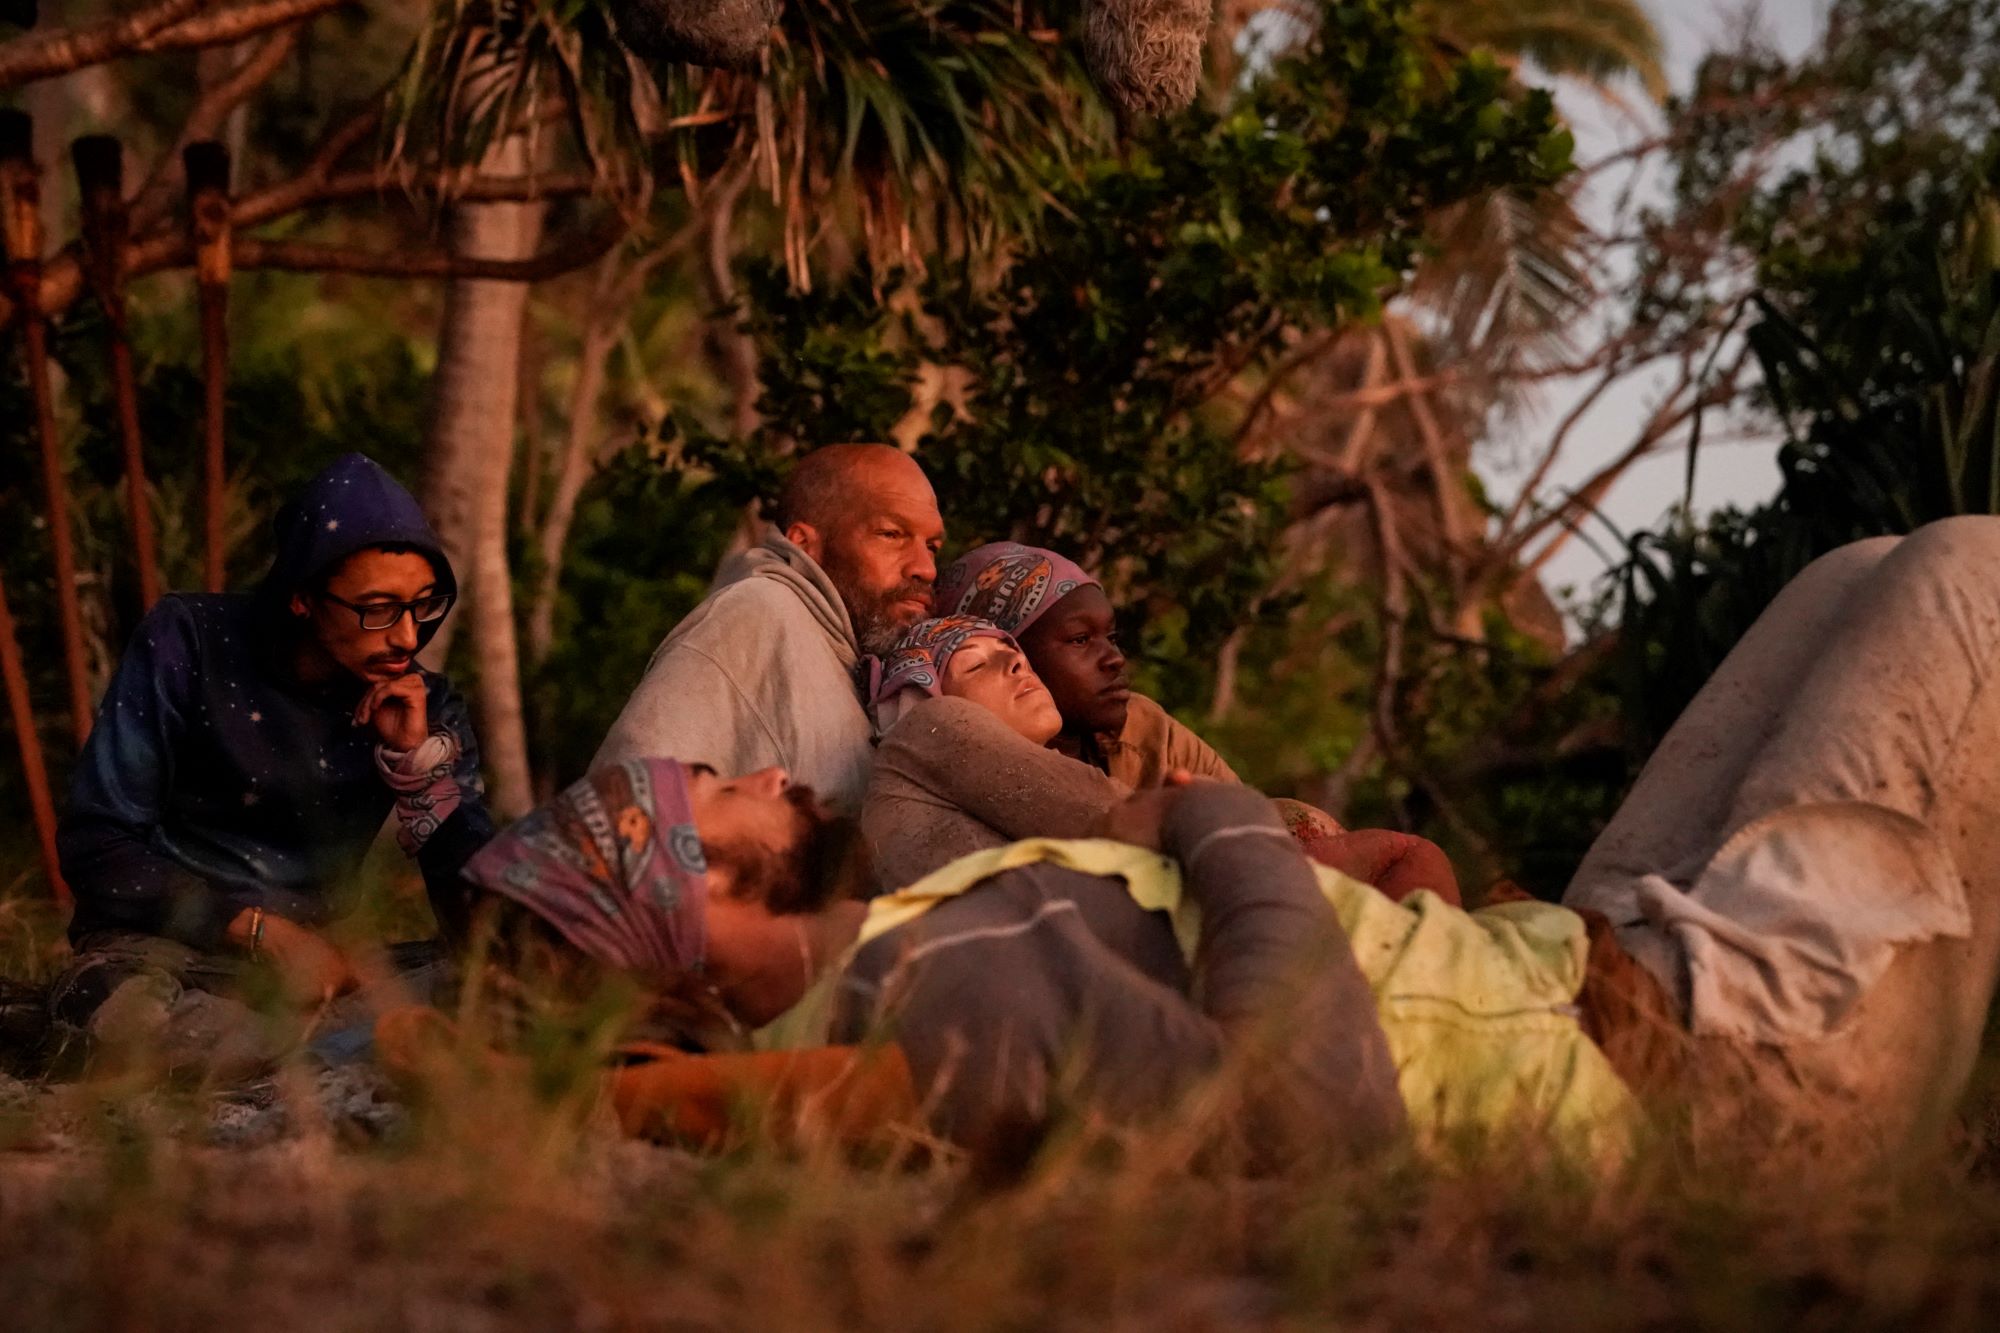 Romeo Escobar, Jonathan Young, Mike Turner, Lindsay Dolashewich, and Maryanne Oketch take in a sunrise together during the 'Survivor' Season 42 finale.